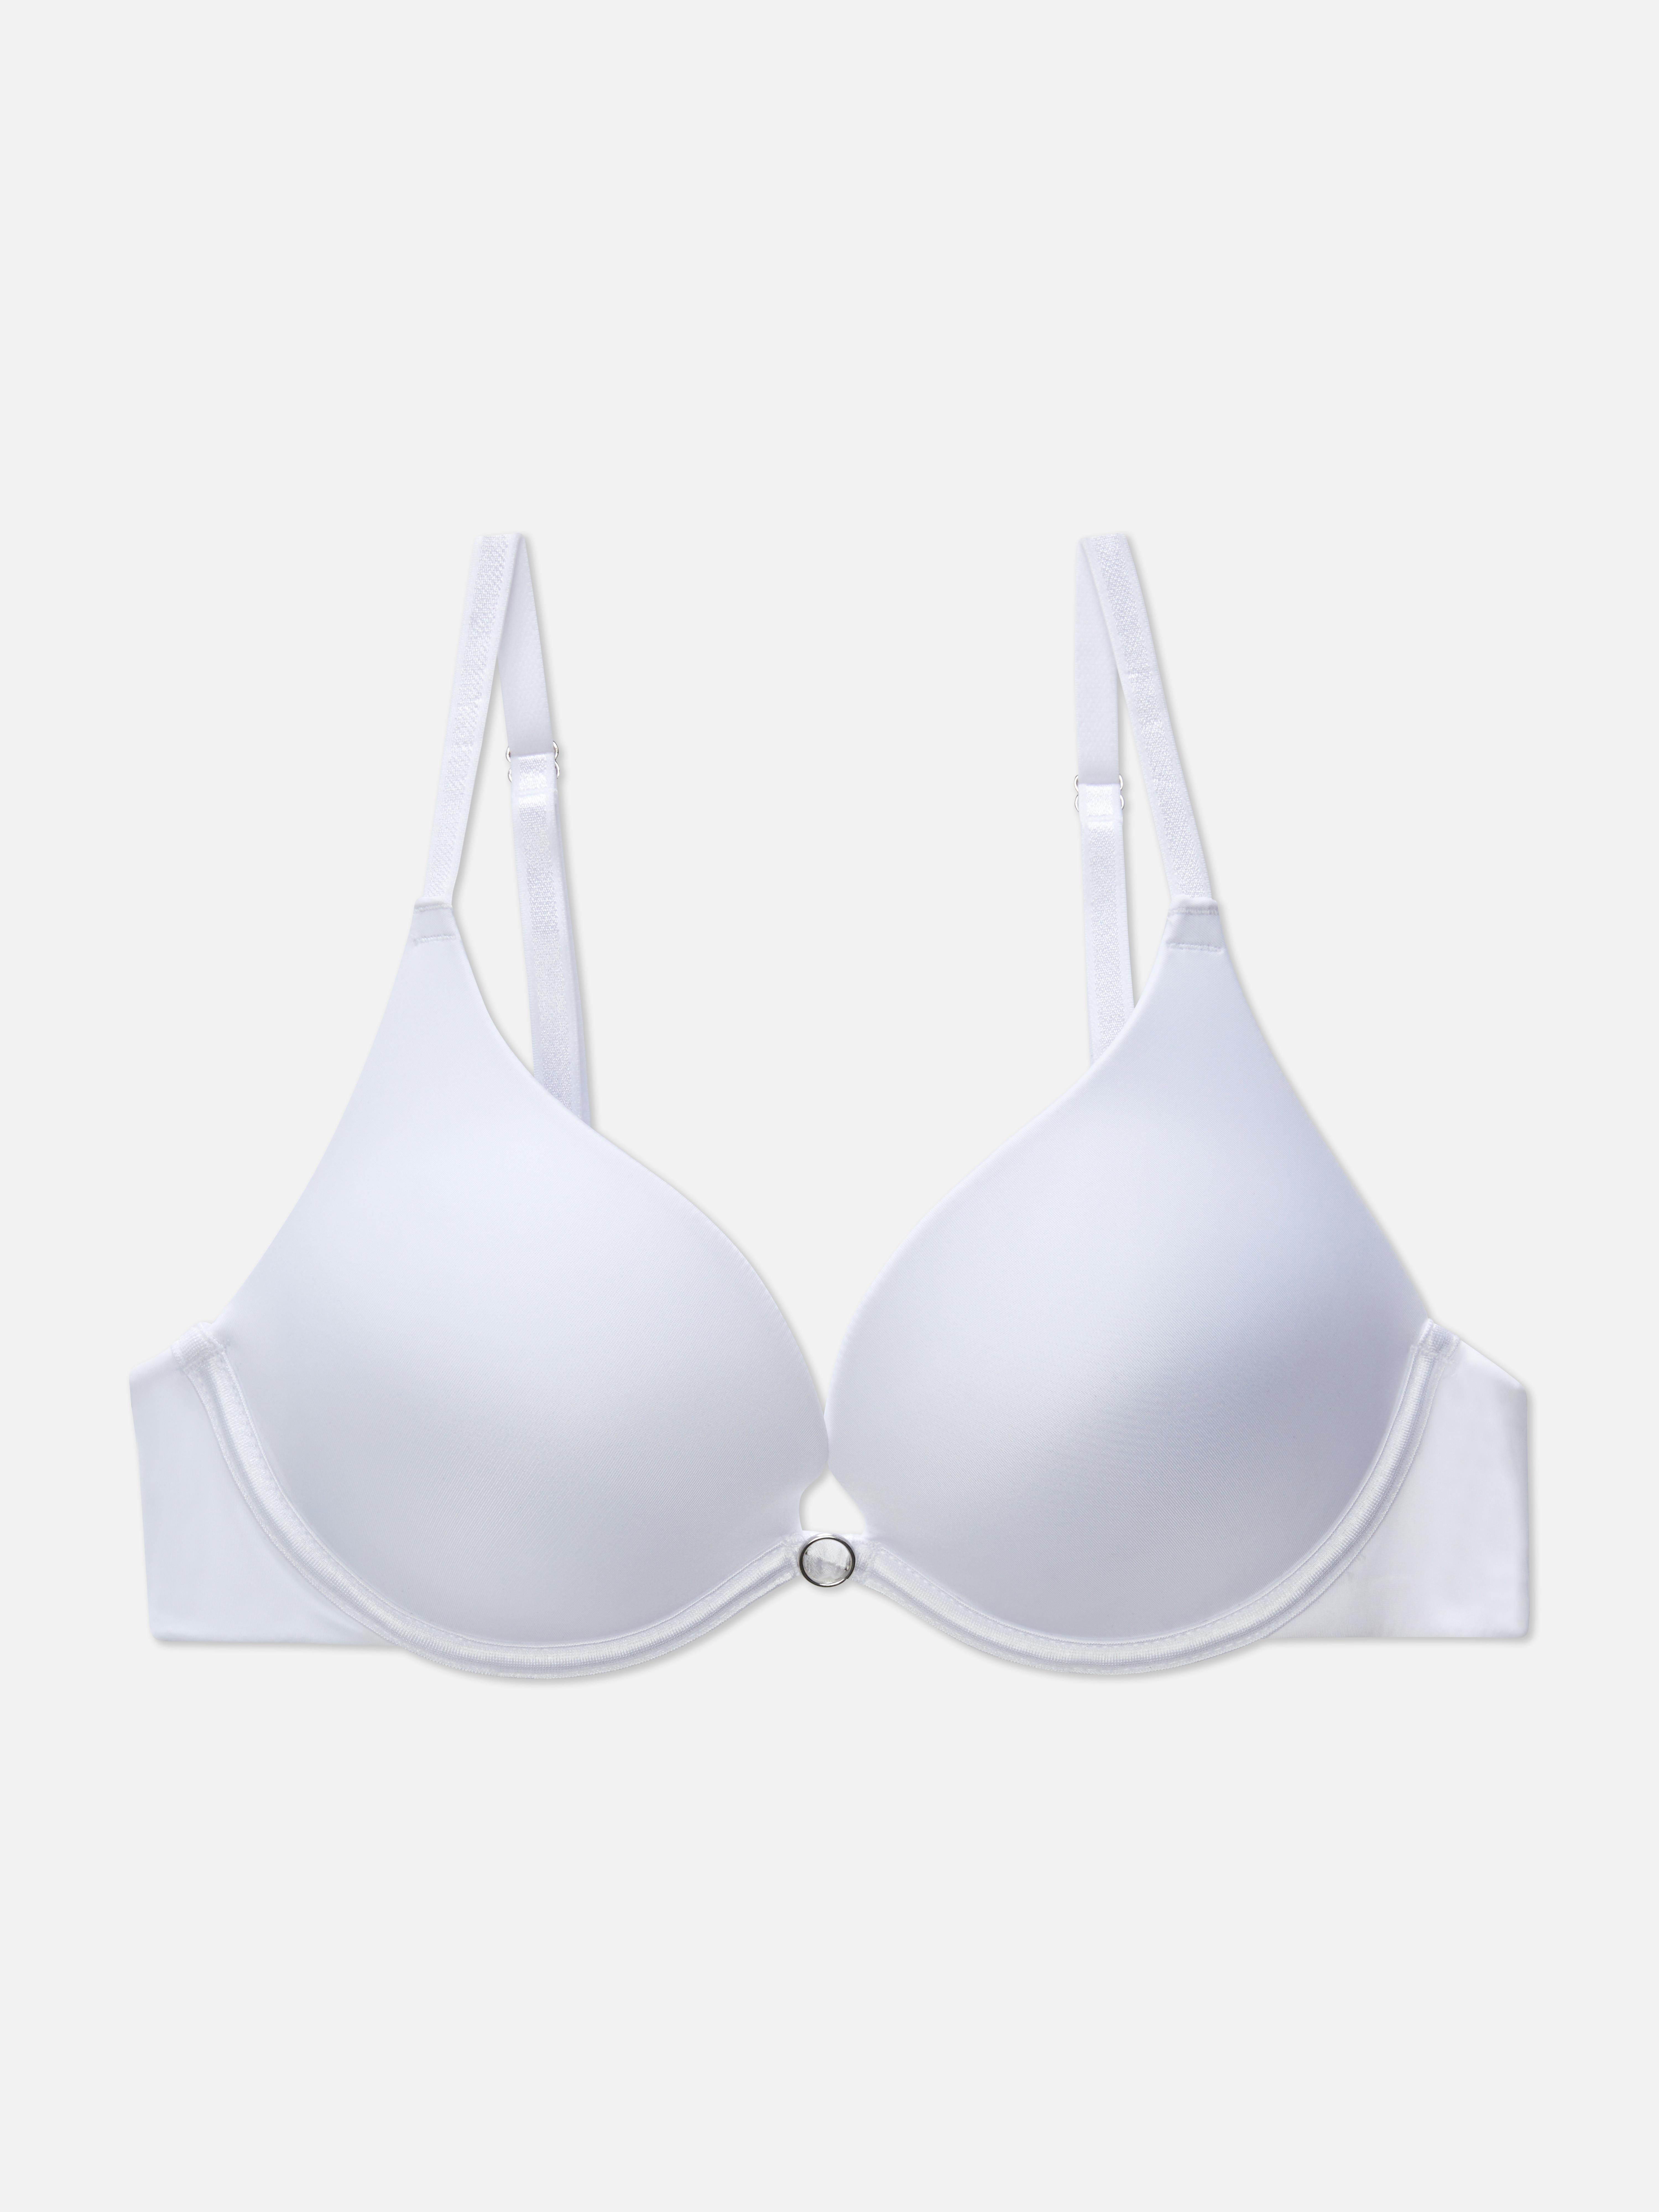 BNWT NEW PRIMARK 36D MAXIMISE boost 2 cup sizes push up bra white MULTIWAY  £25.95 - PicClick UK